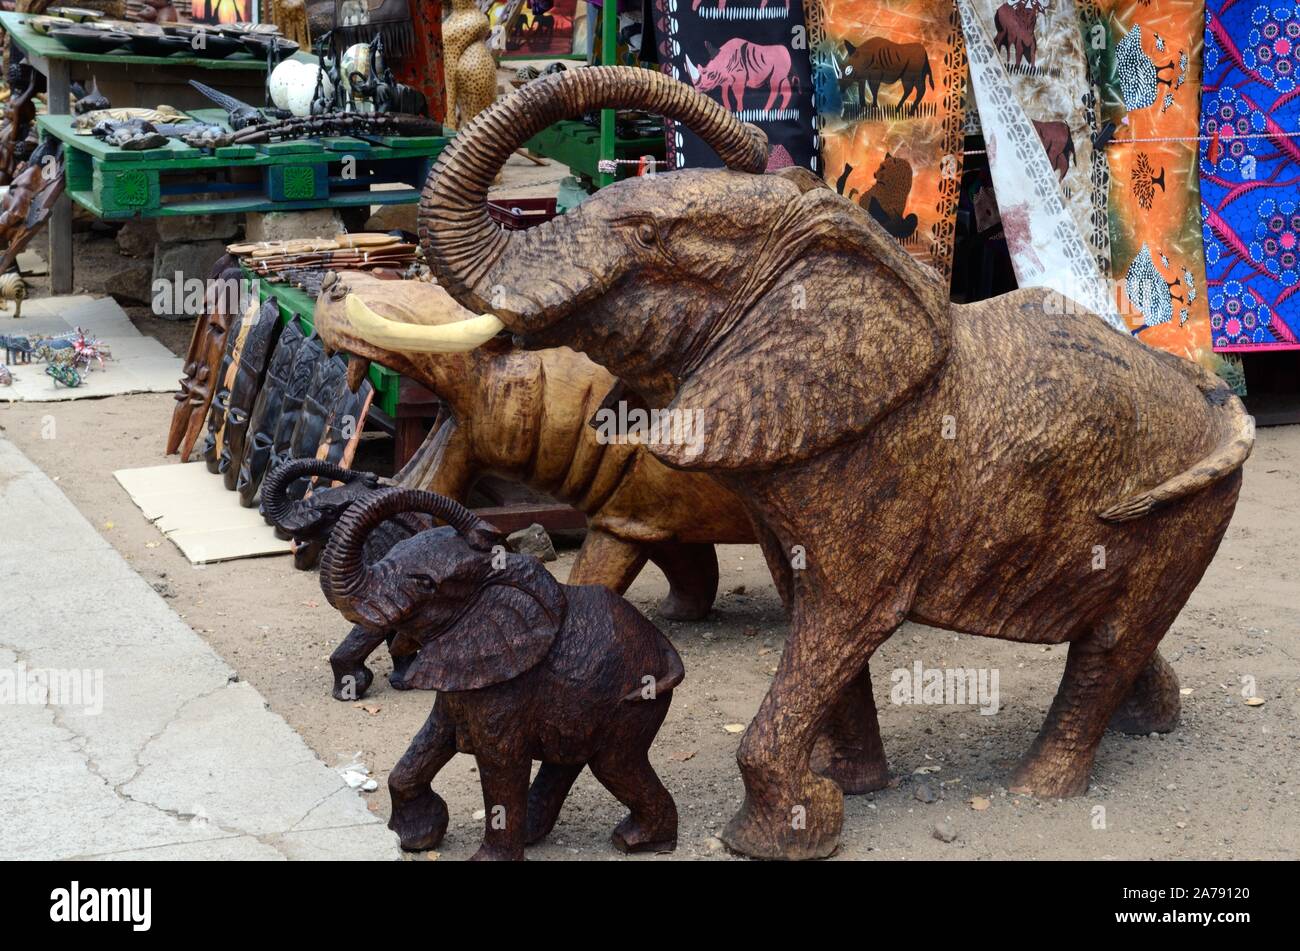 Carved wooden elephants and art craft for sale at a roadside market Botswana Africa Stock Photo